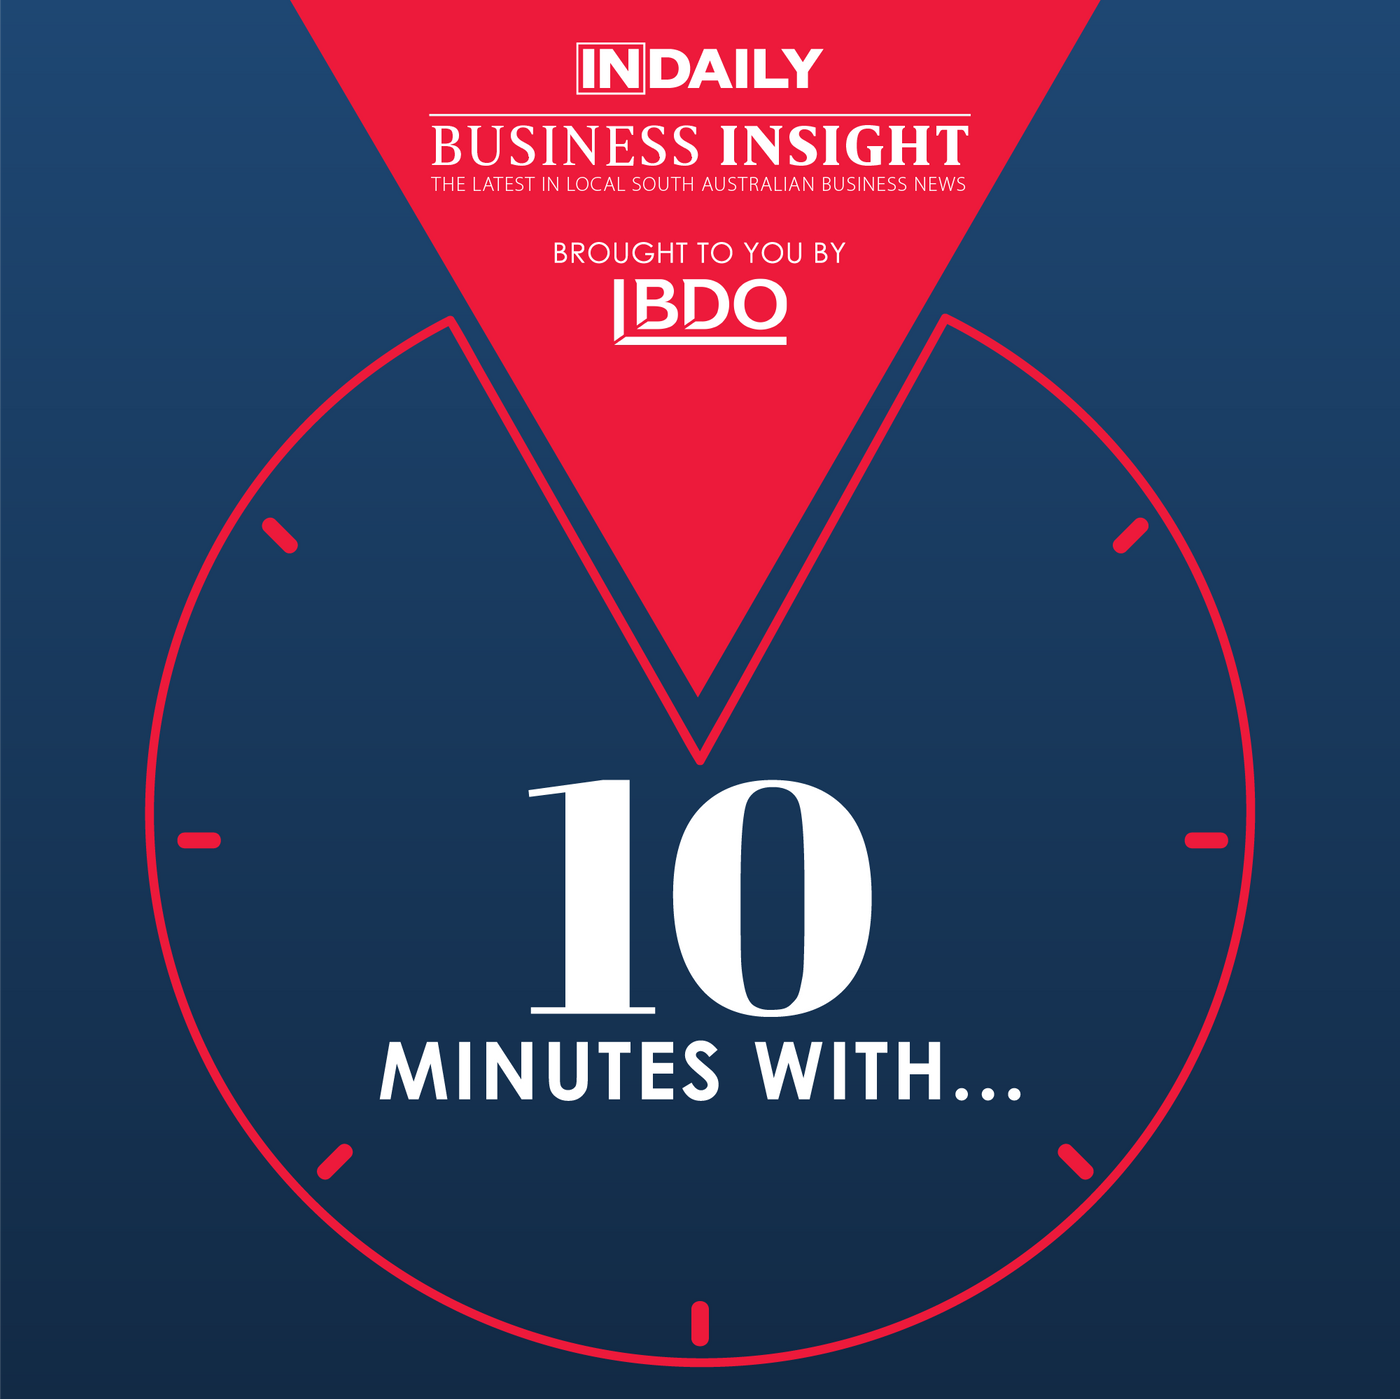 10 Minutes with... Business Insights from a local expert